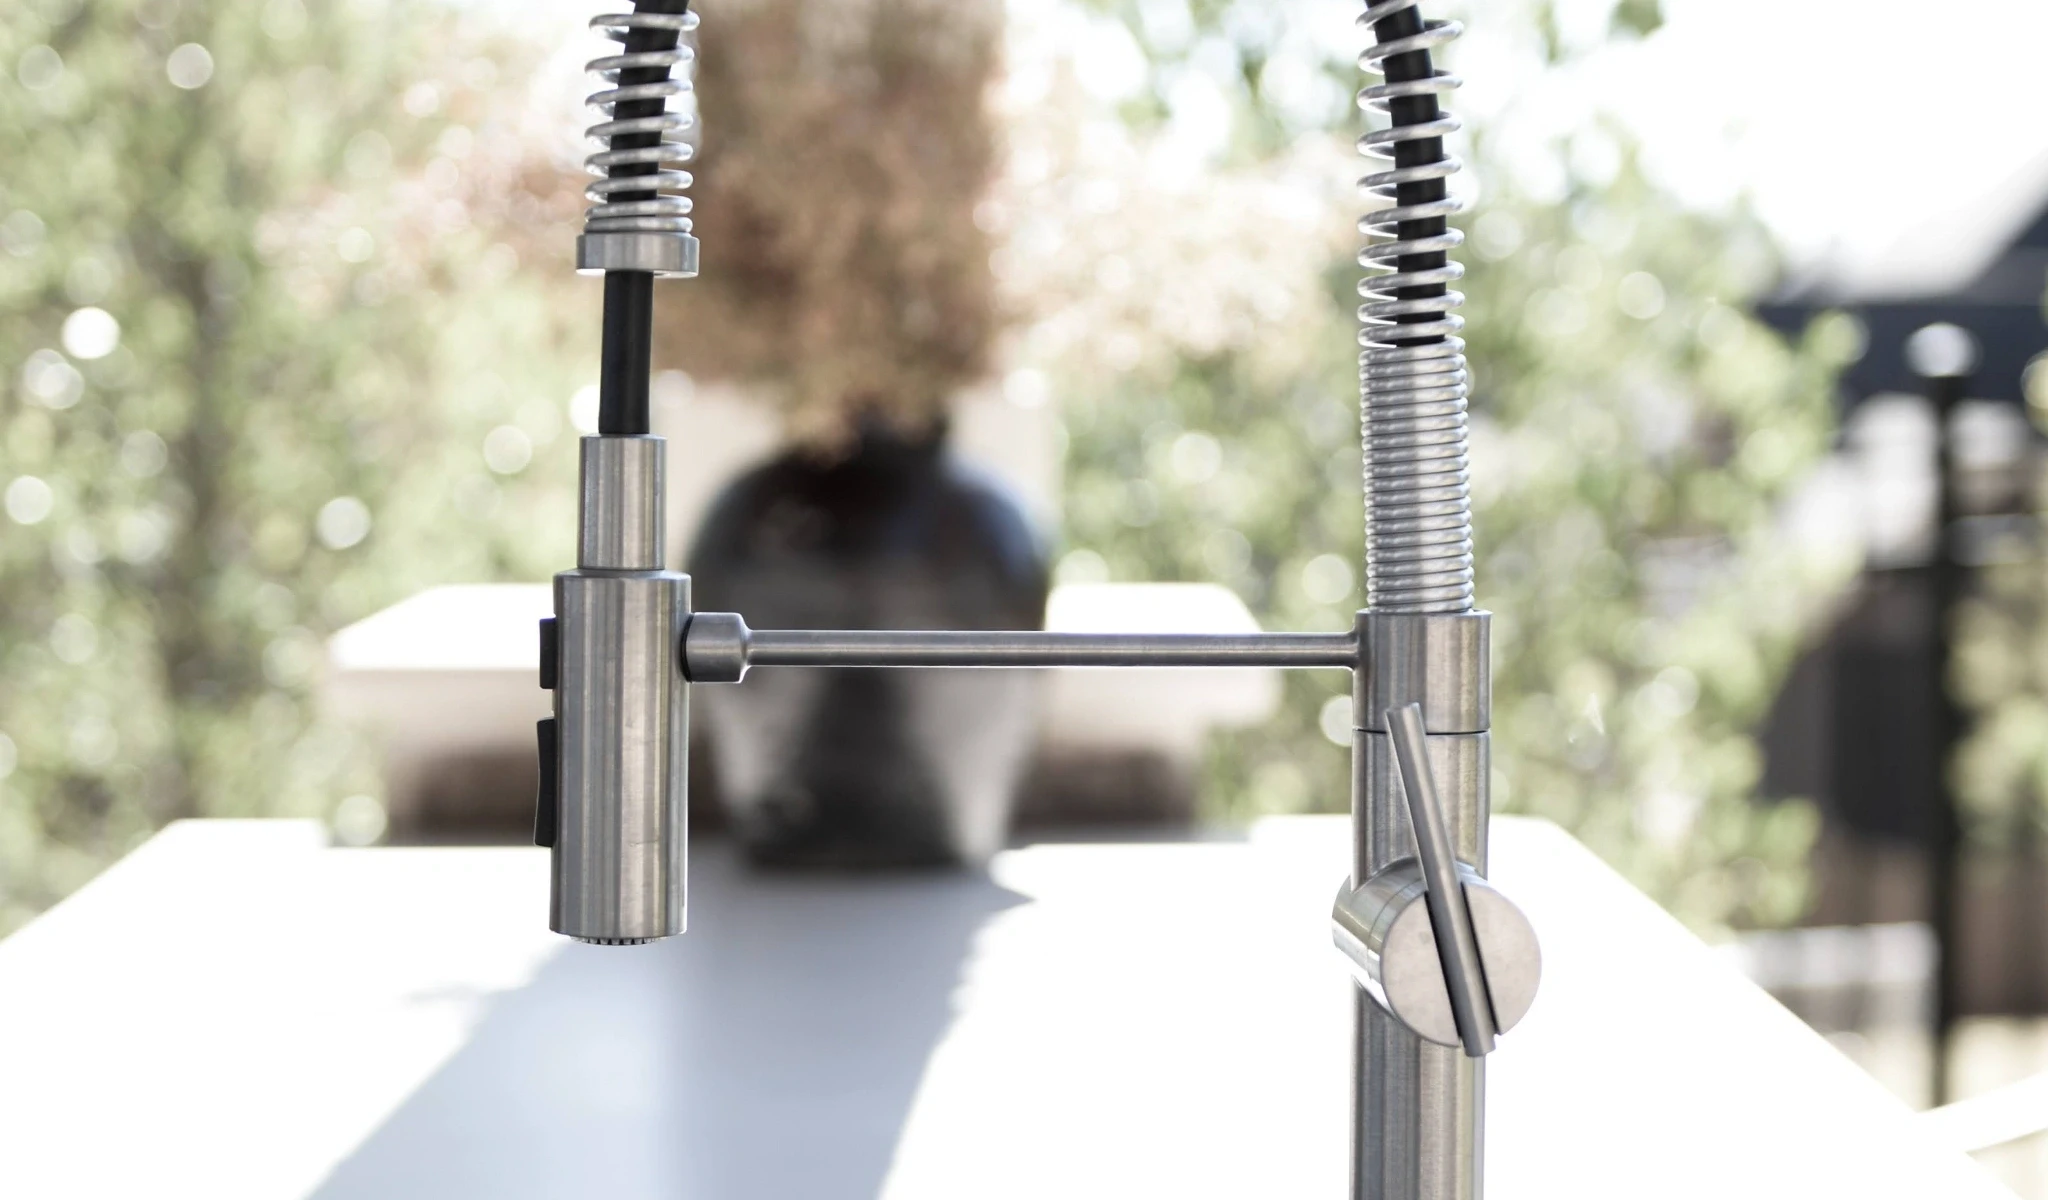 A stainless steel kitchen faucet outside.